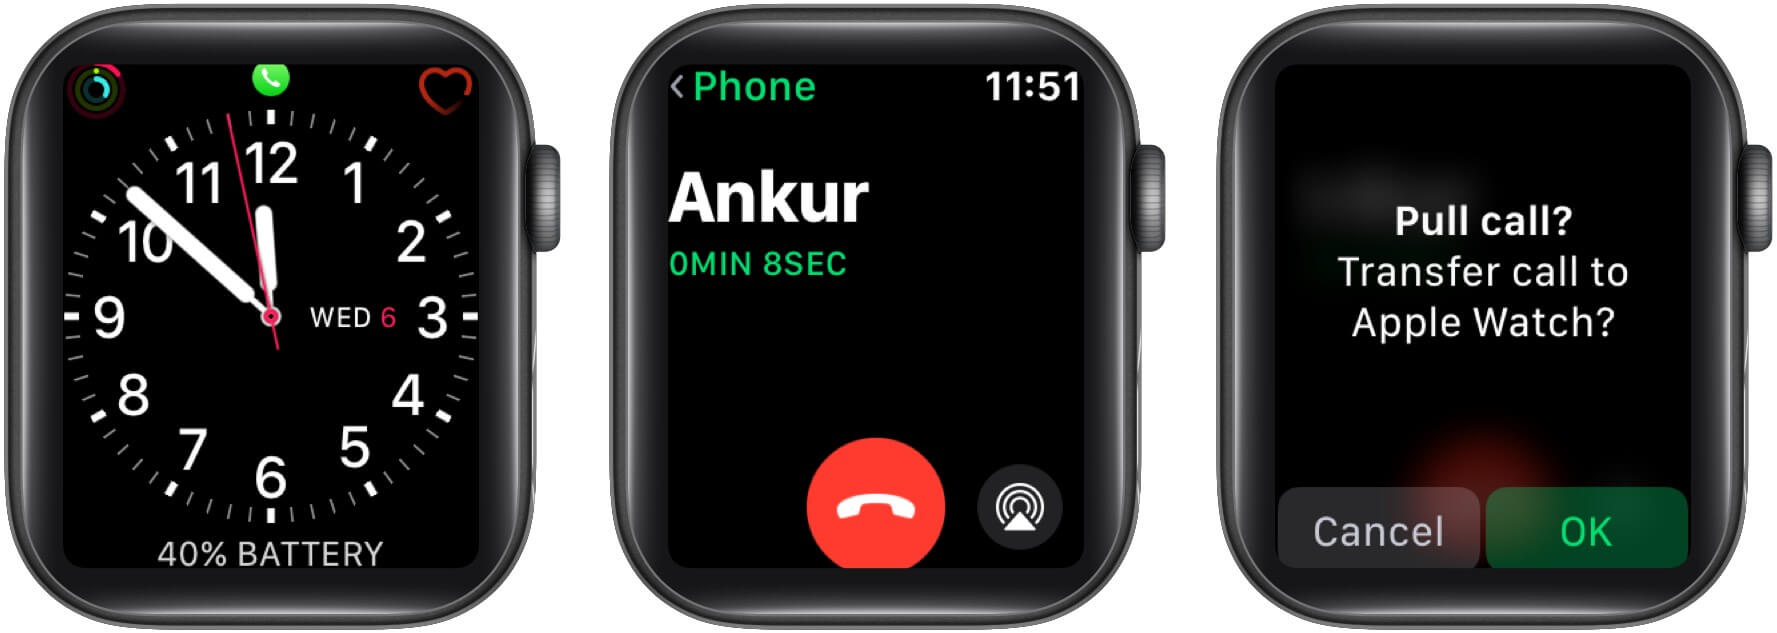 Transfer FaceTime call from iPhone to Apple Watch